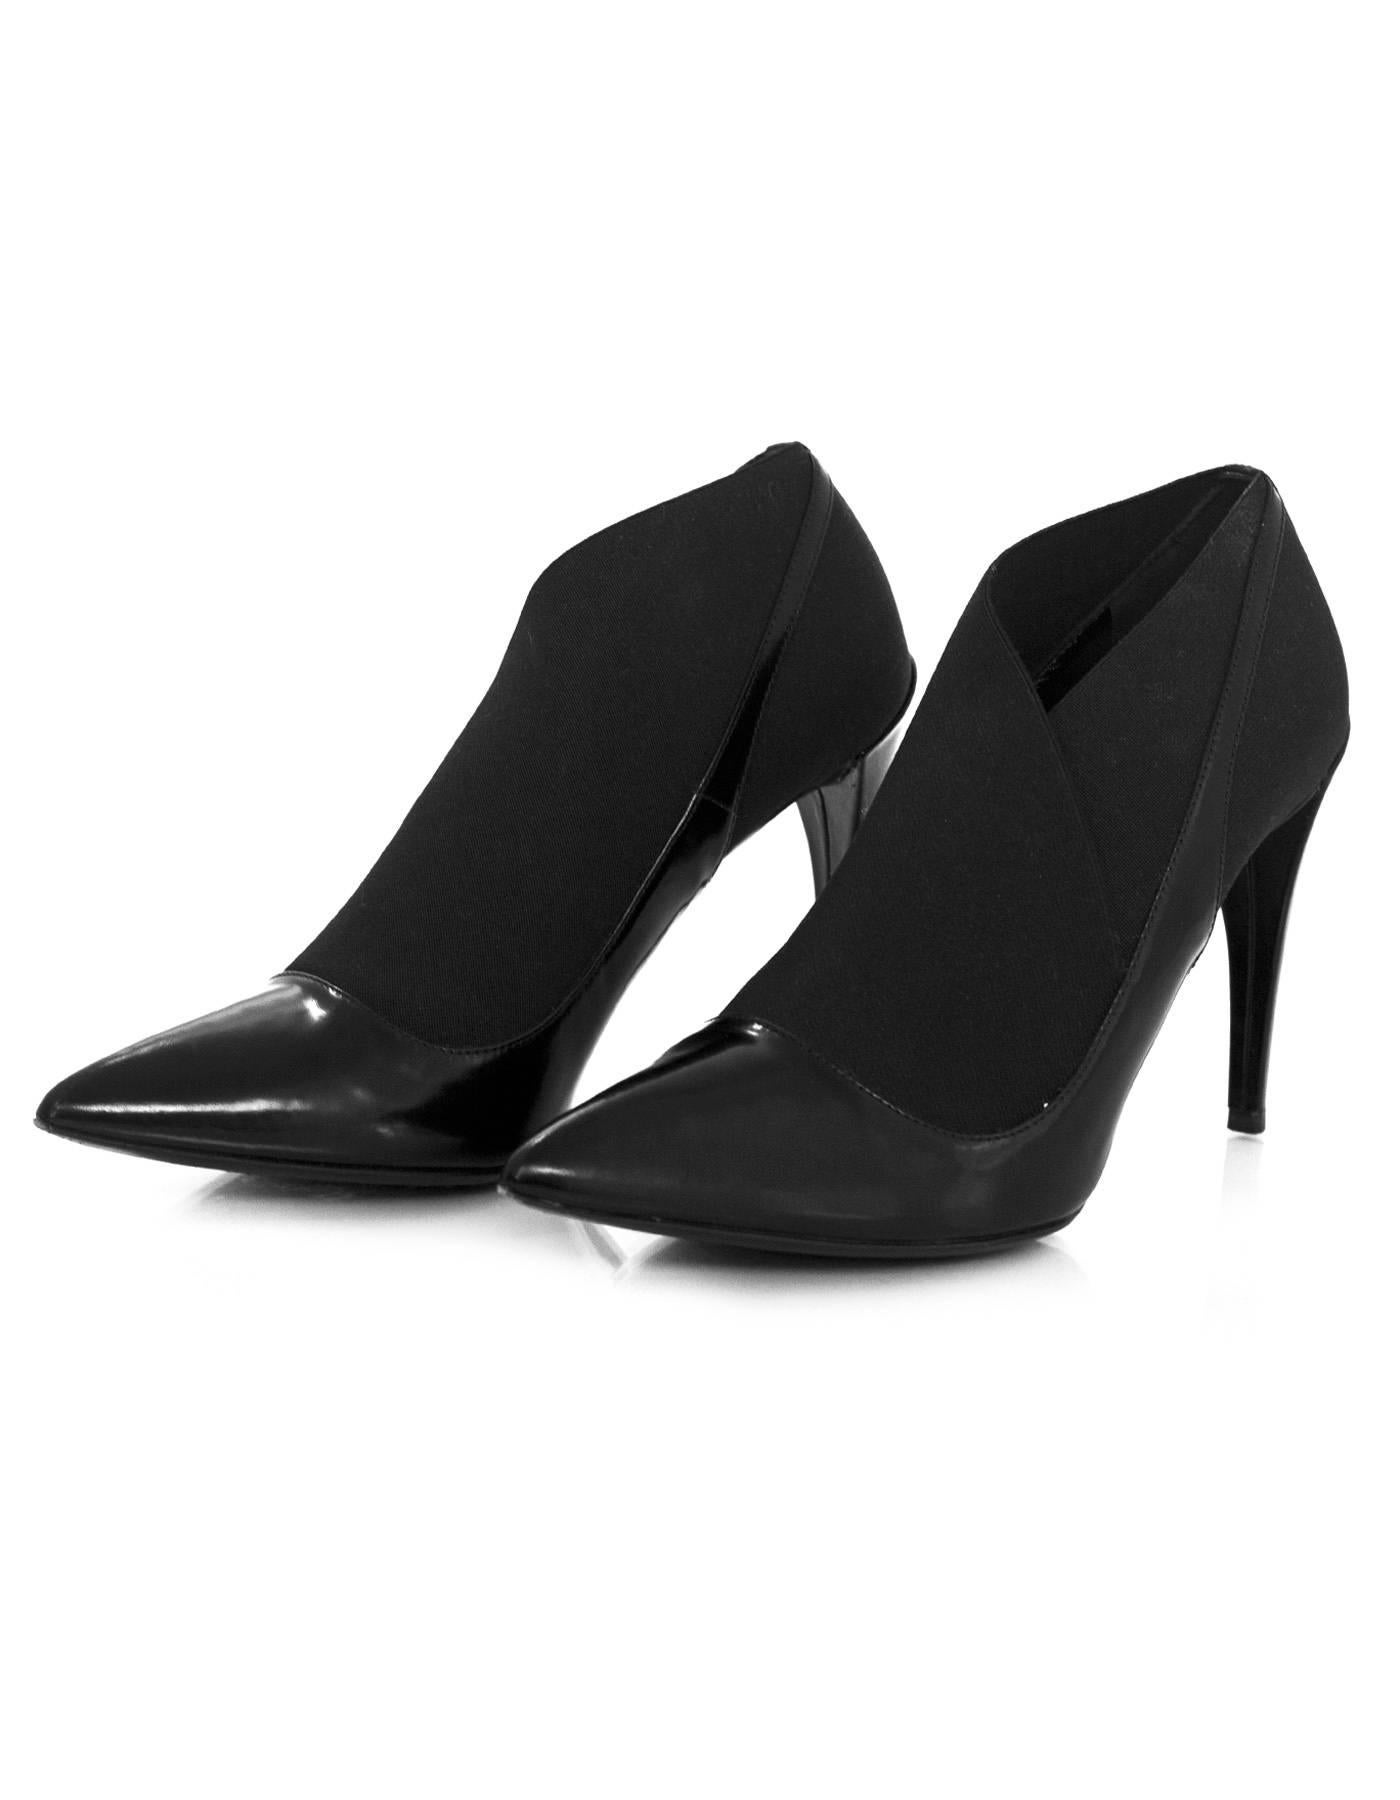 Christian Dior Black Leather & Elastic Pumps 

Made In: Italy
Color: Black
Materials: Leather and elastic
Closure/Opening: Slip on
Sole Stamp: Made in Italy 37 1/2 CD
Overall Condition: Excellent pre-owned condition with the exception of some wear